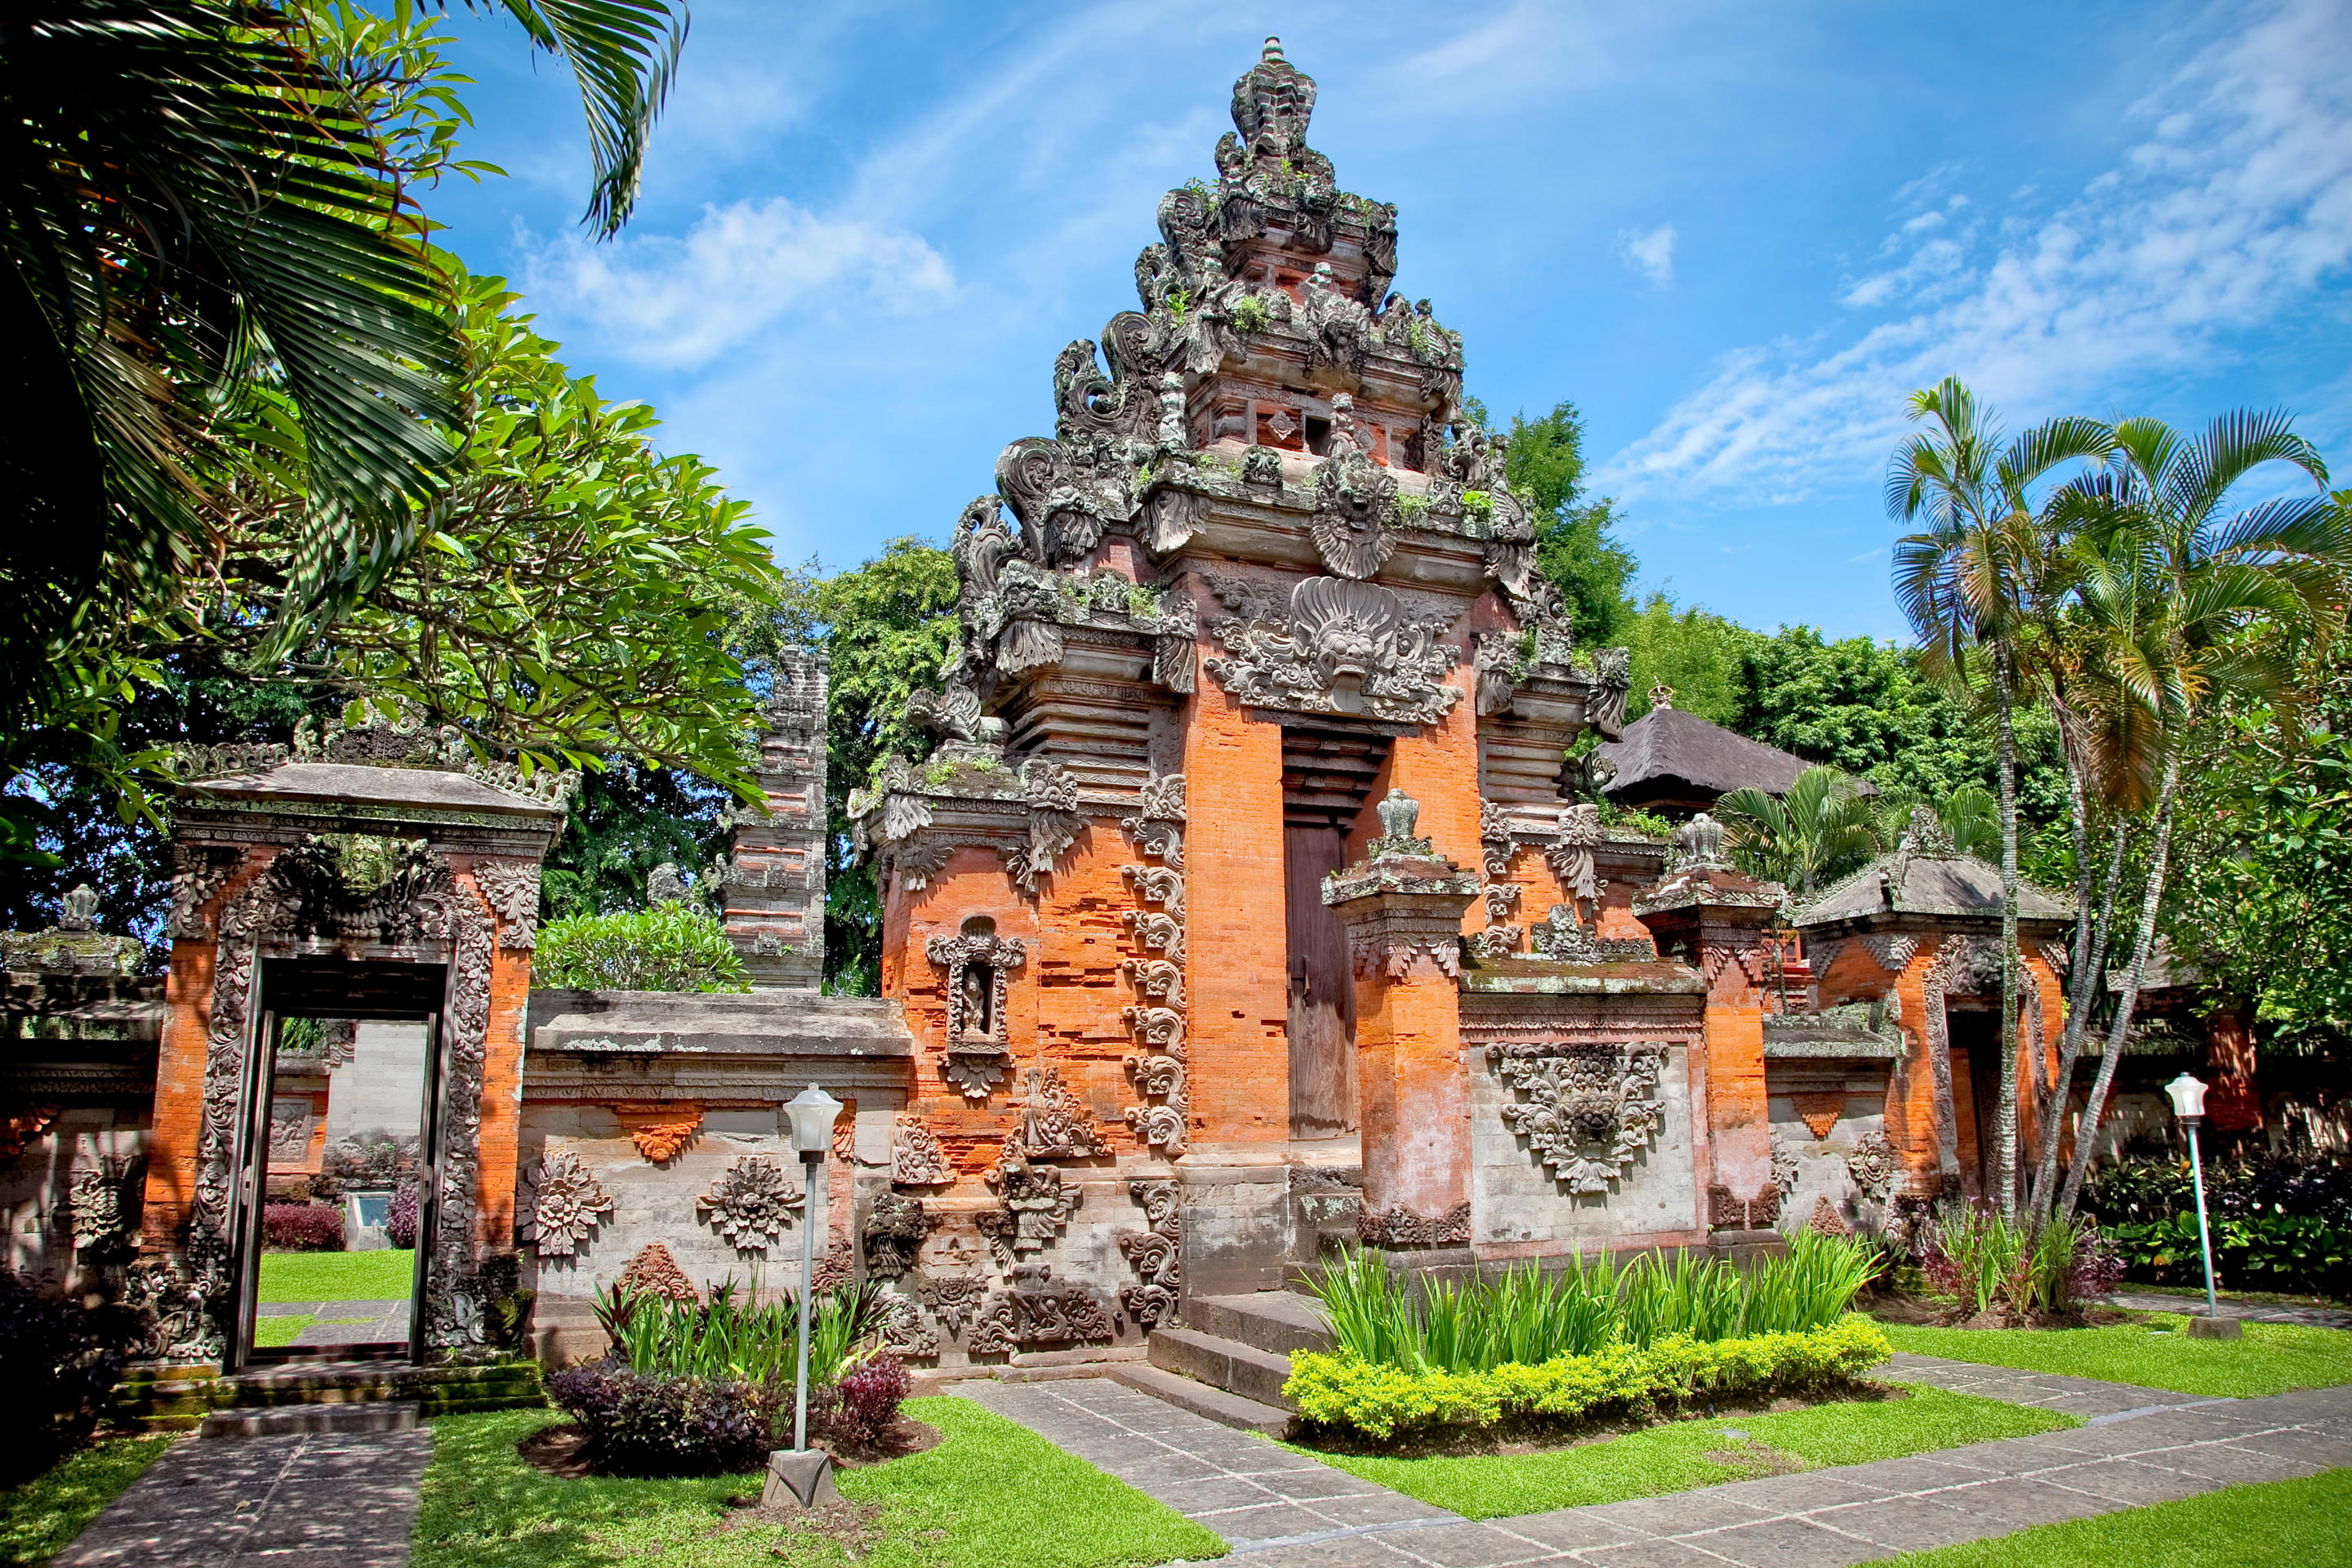 Bali Museum Overview